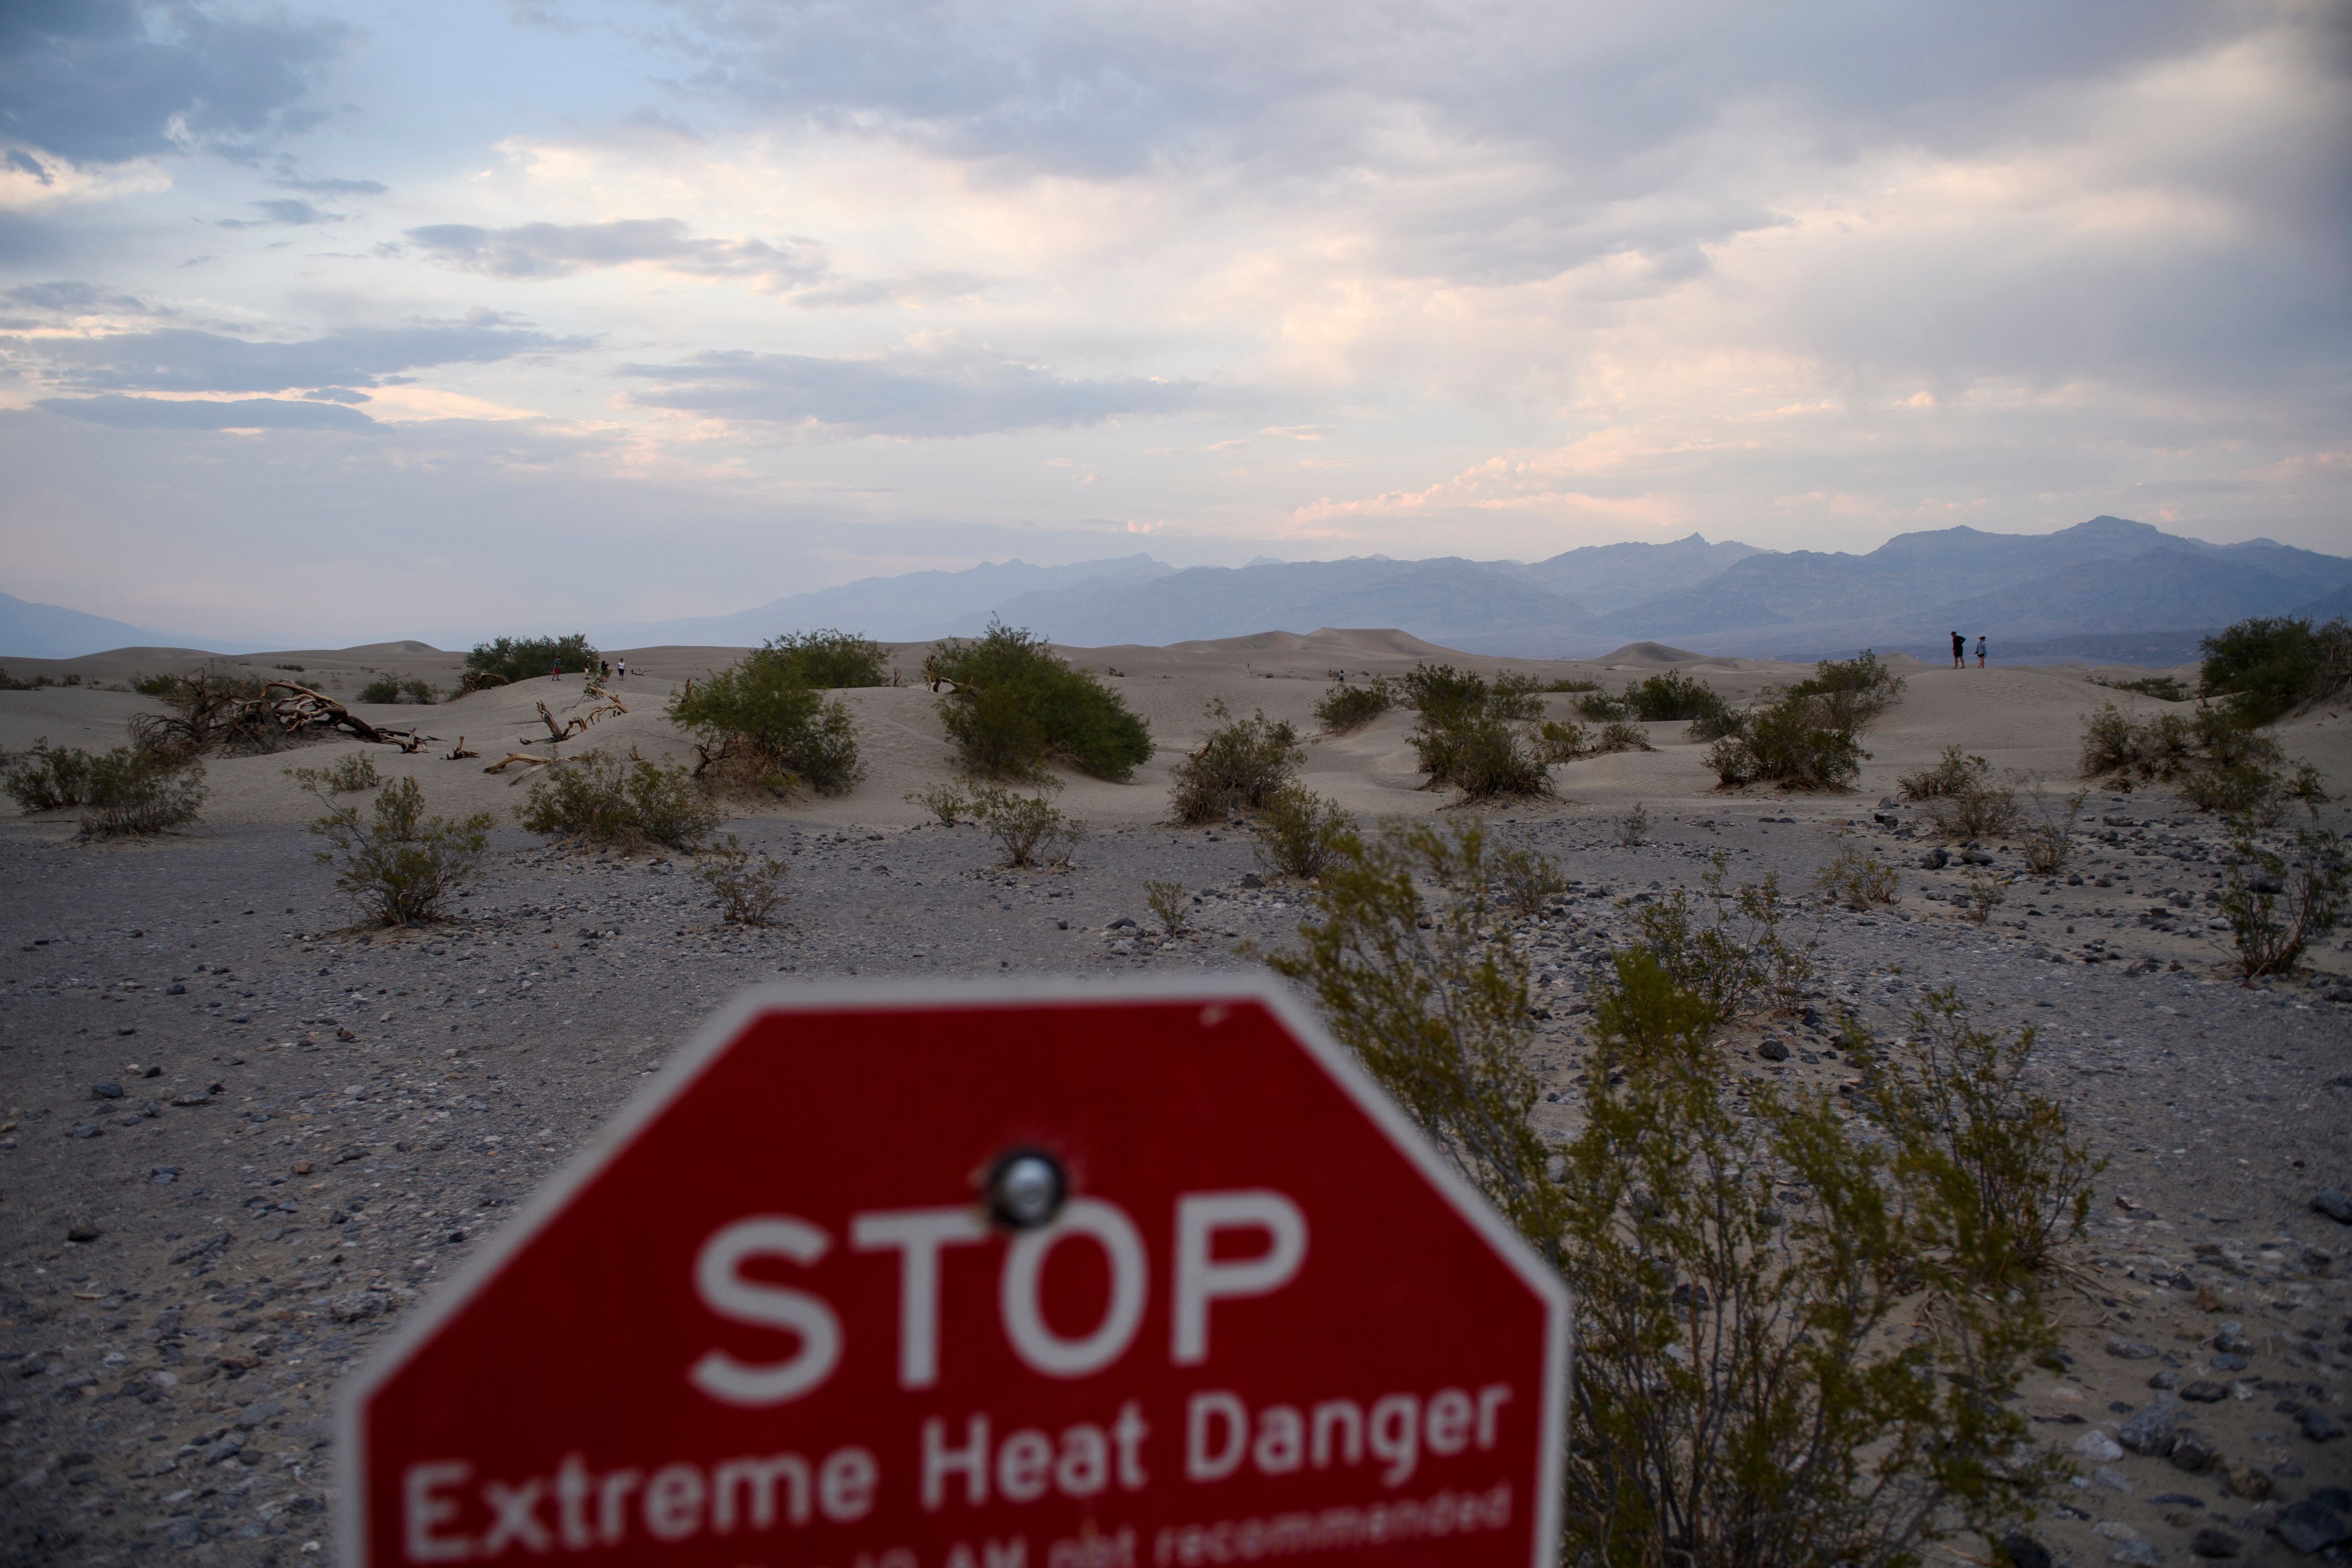 More than 80 million Americans are currently under heat alerts